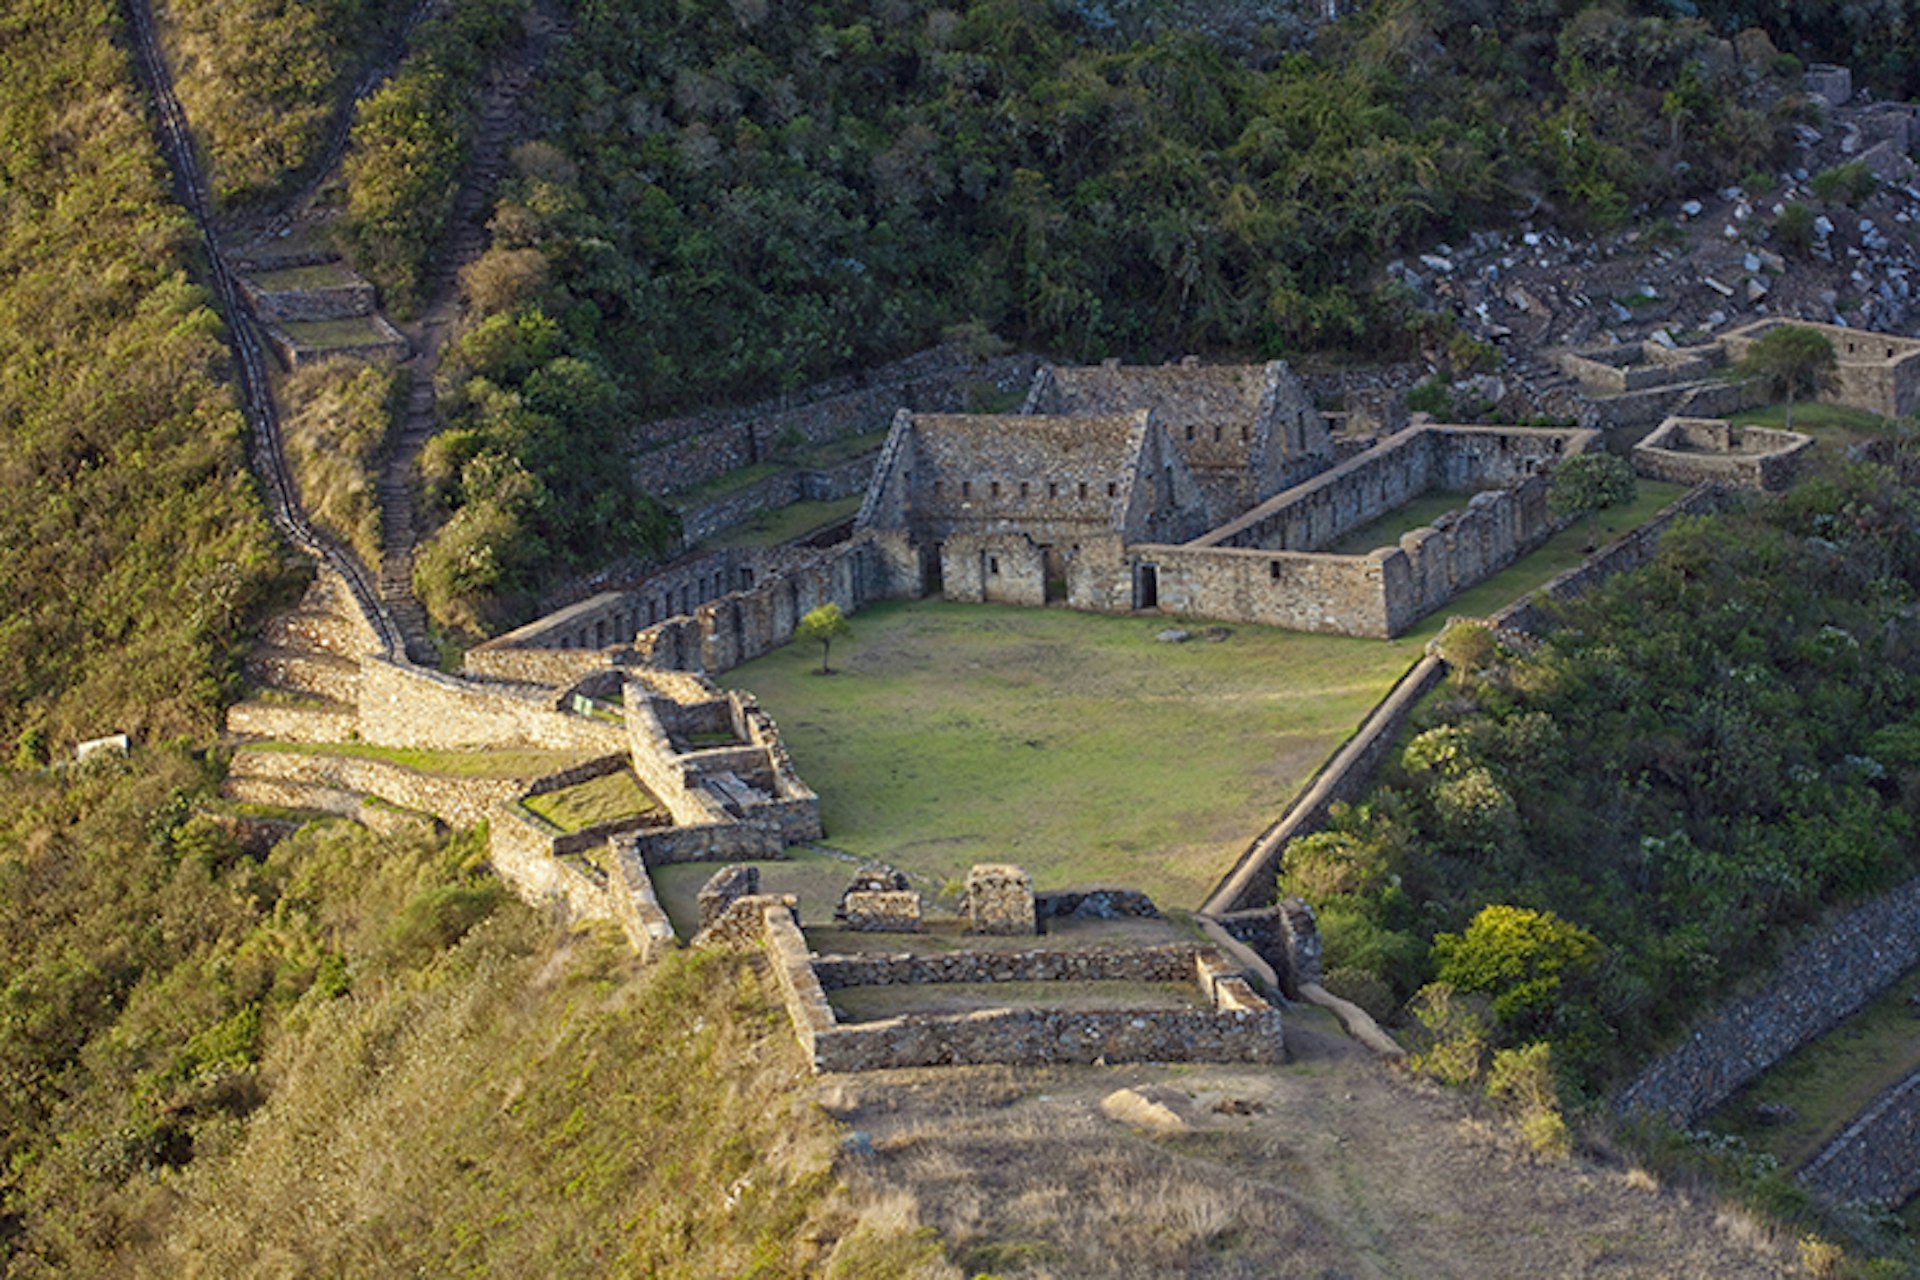 Can't face the crowds at Machu Picchu? Choquequirao is a little-visited alternative. Image by Alex Robinson / AWL Images / Getty Images